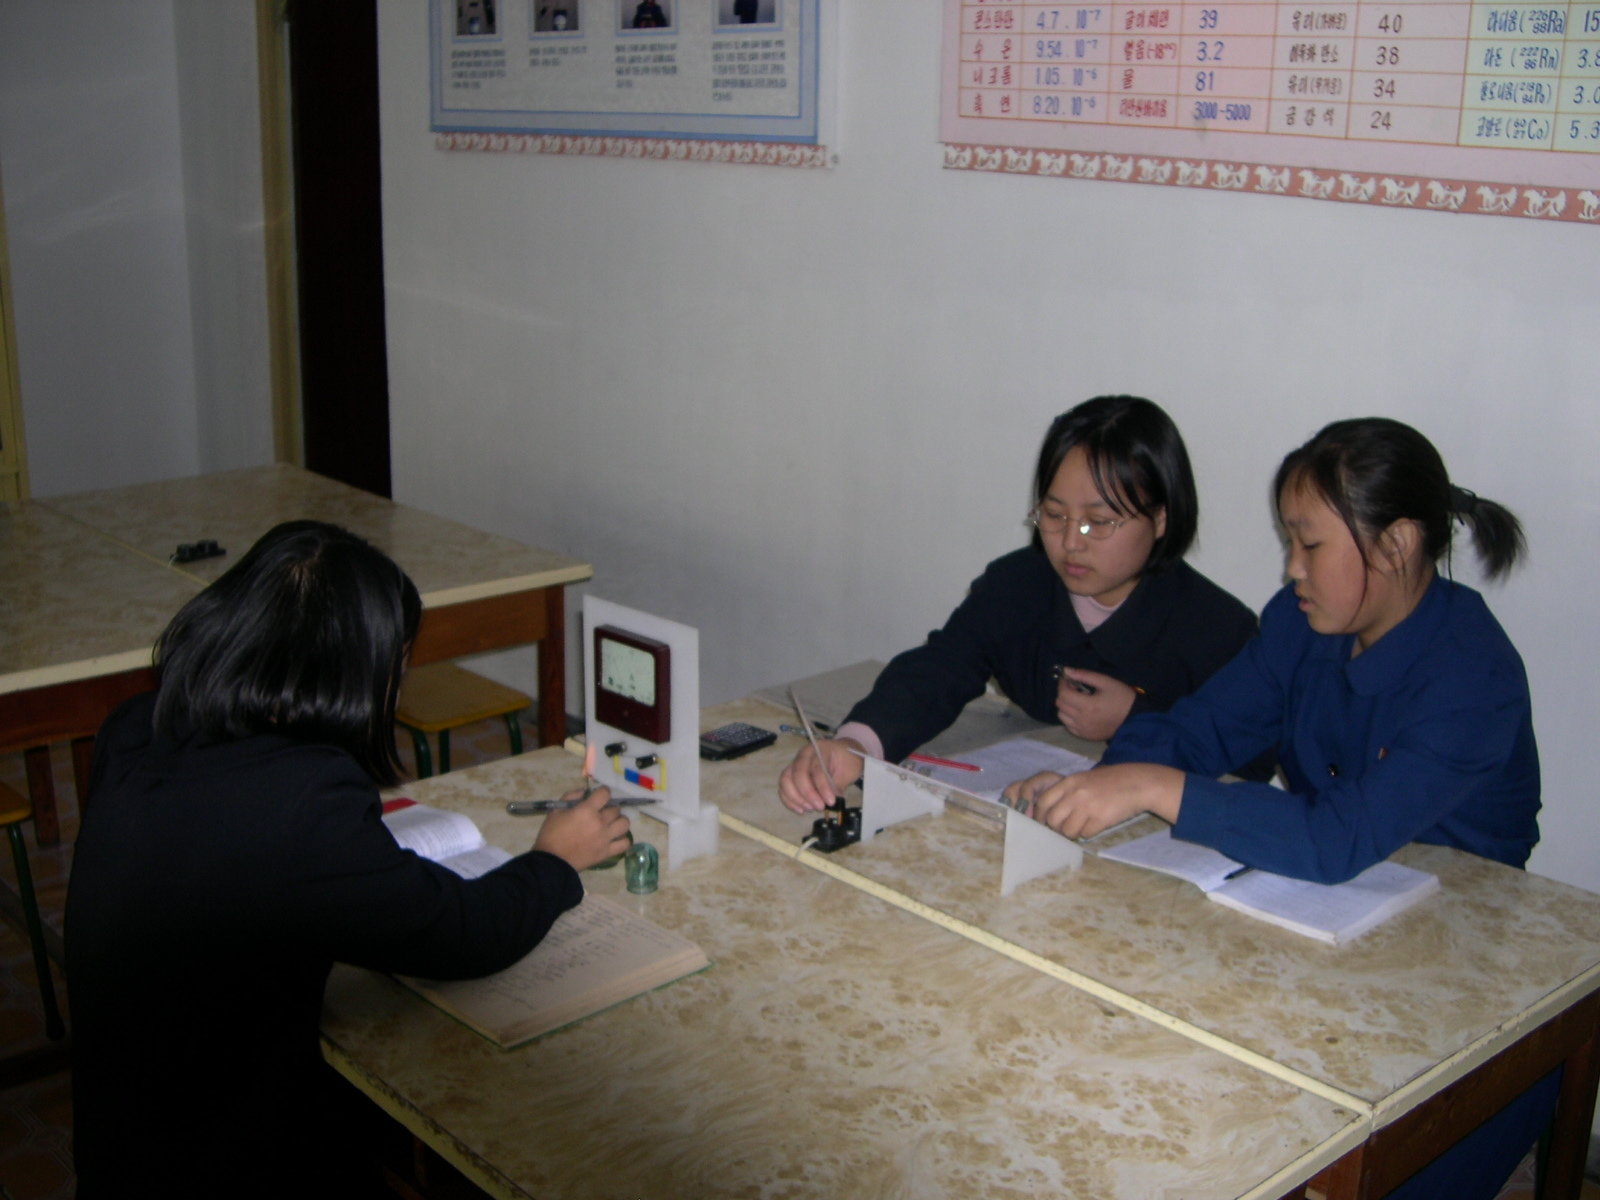 Three girls in student uniform are conducting physics tabletop experiment